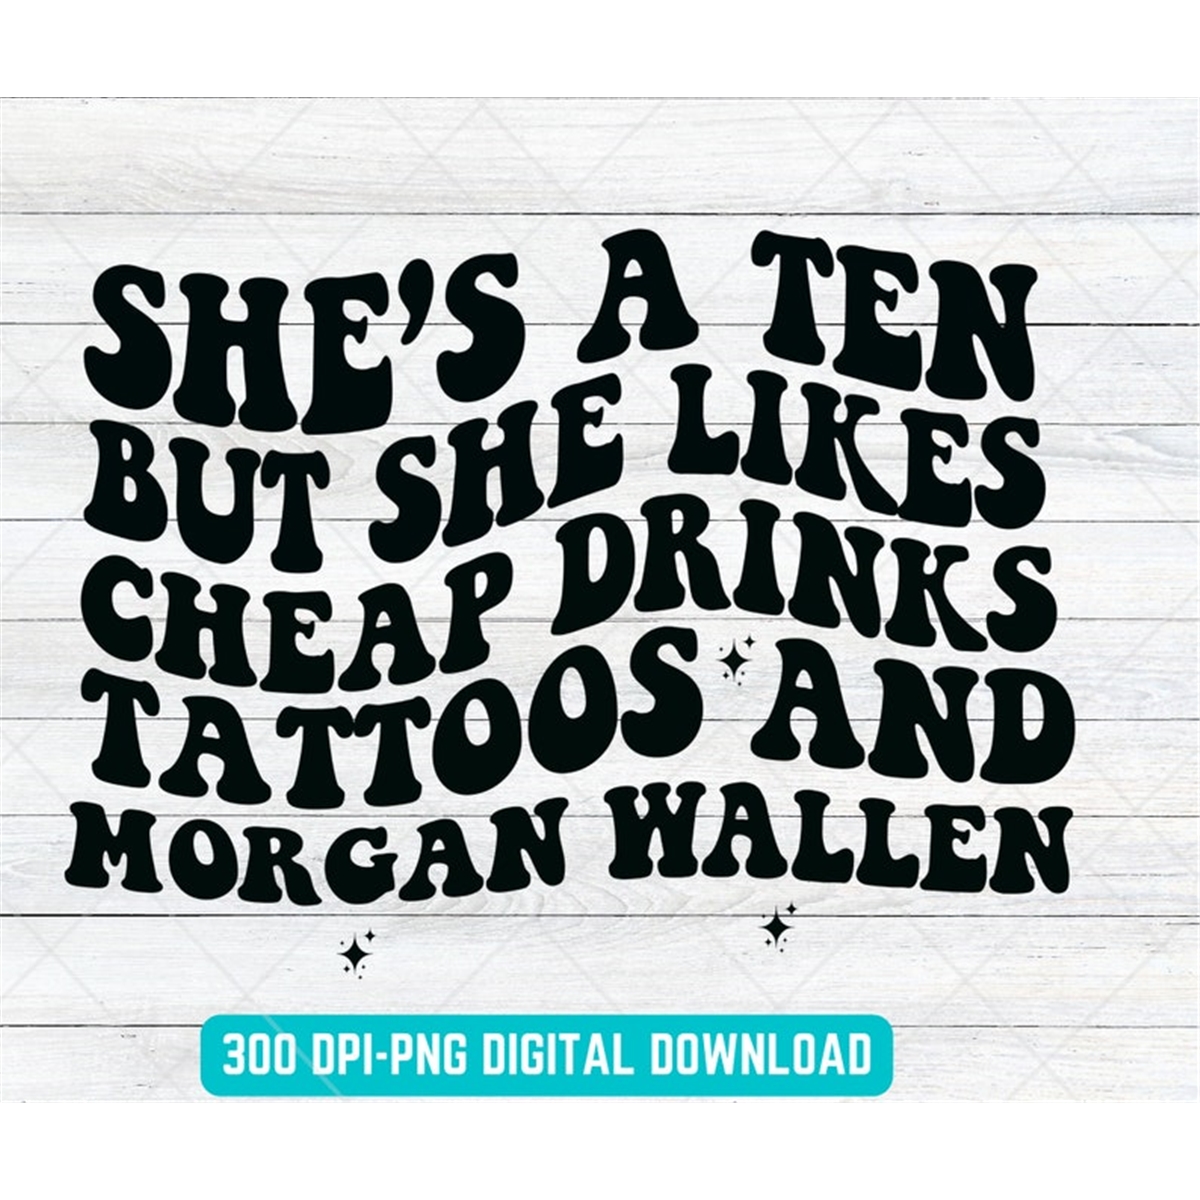 shes-a-ten-but-she-likes-cheap-drinks-tattoos-and-mw-image-1